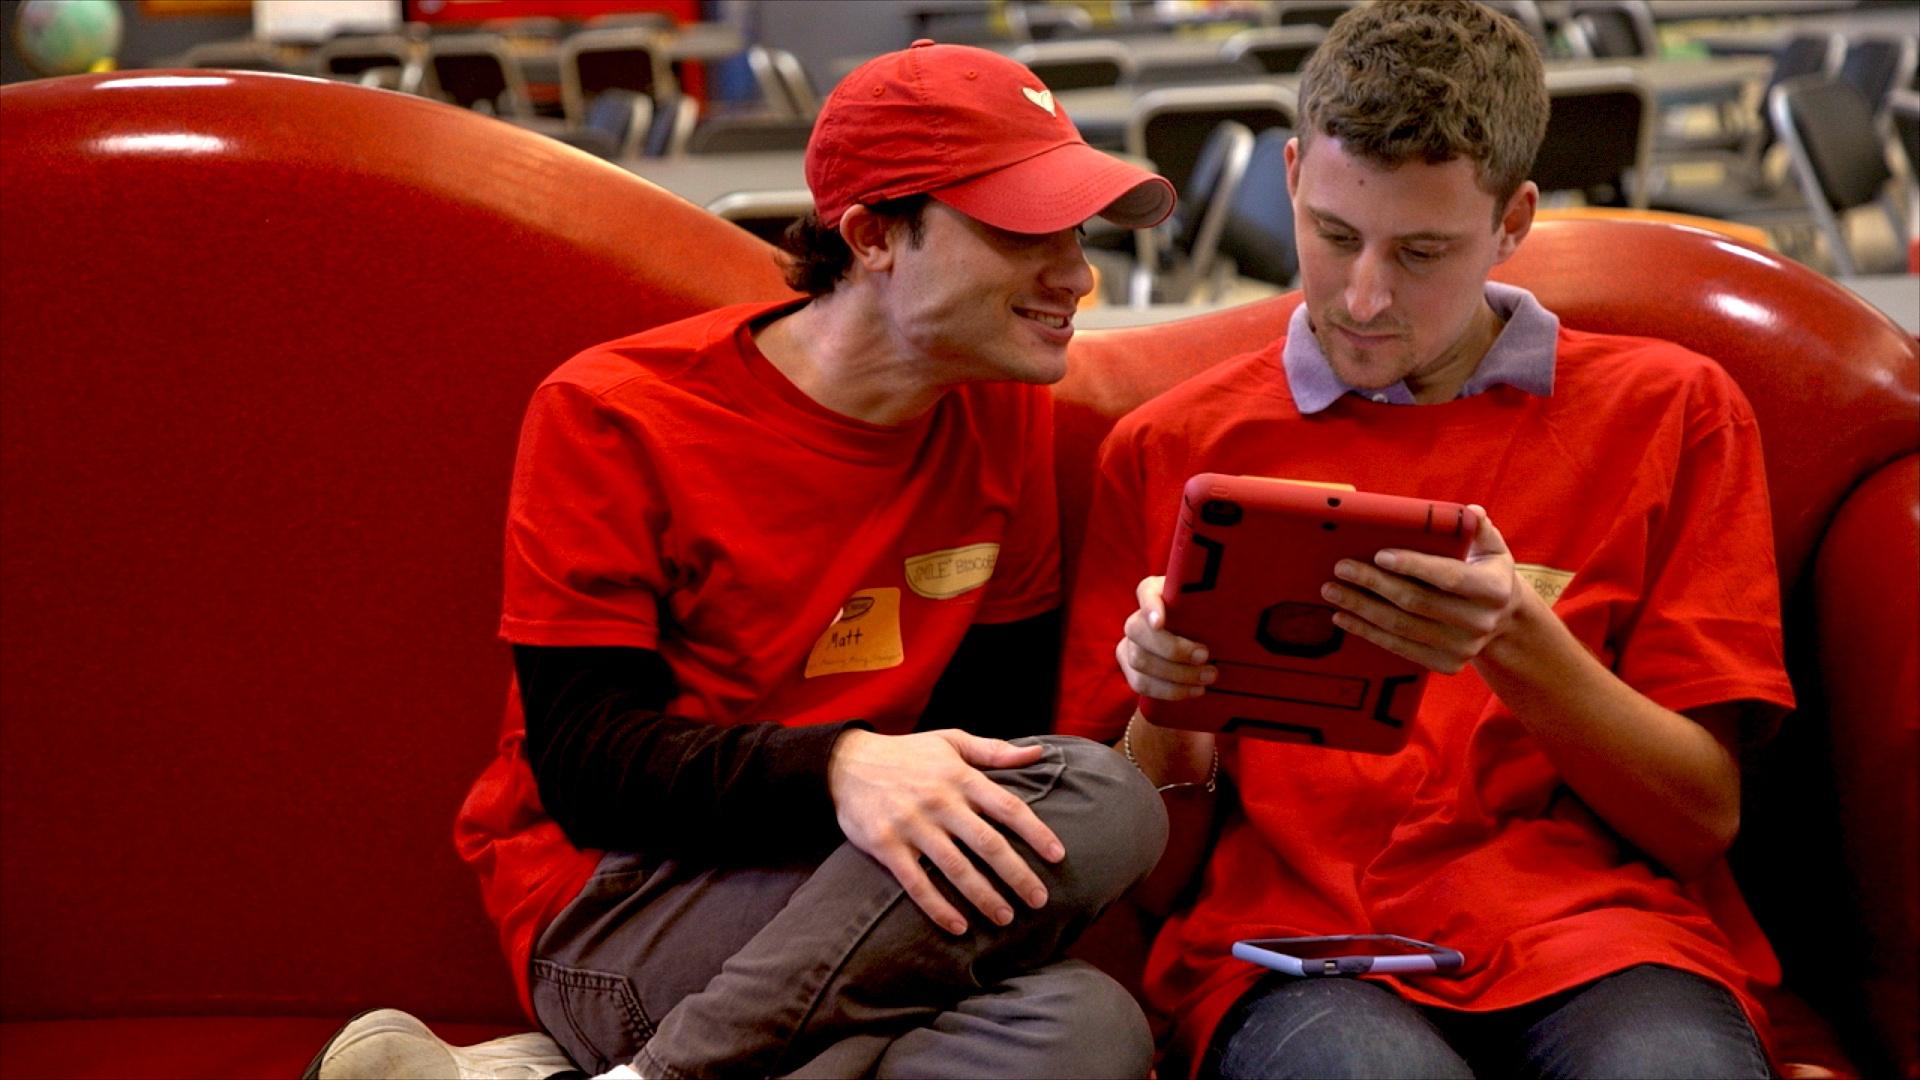 Mickey and his friend Matt hanging out and playing Scrabble on Matt’s tablet.